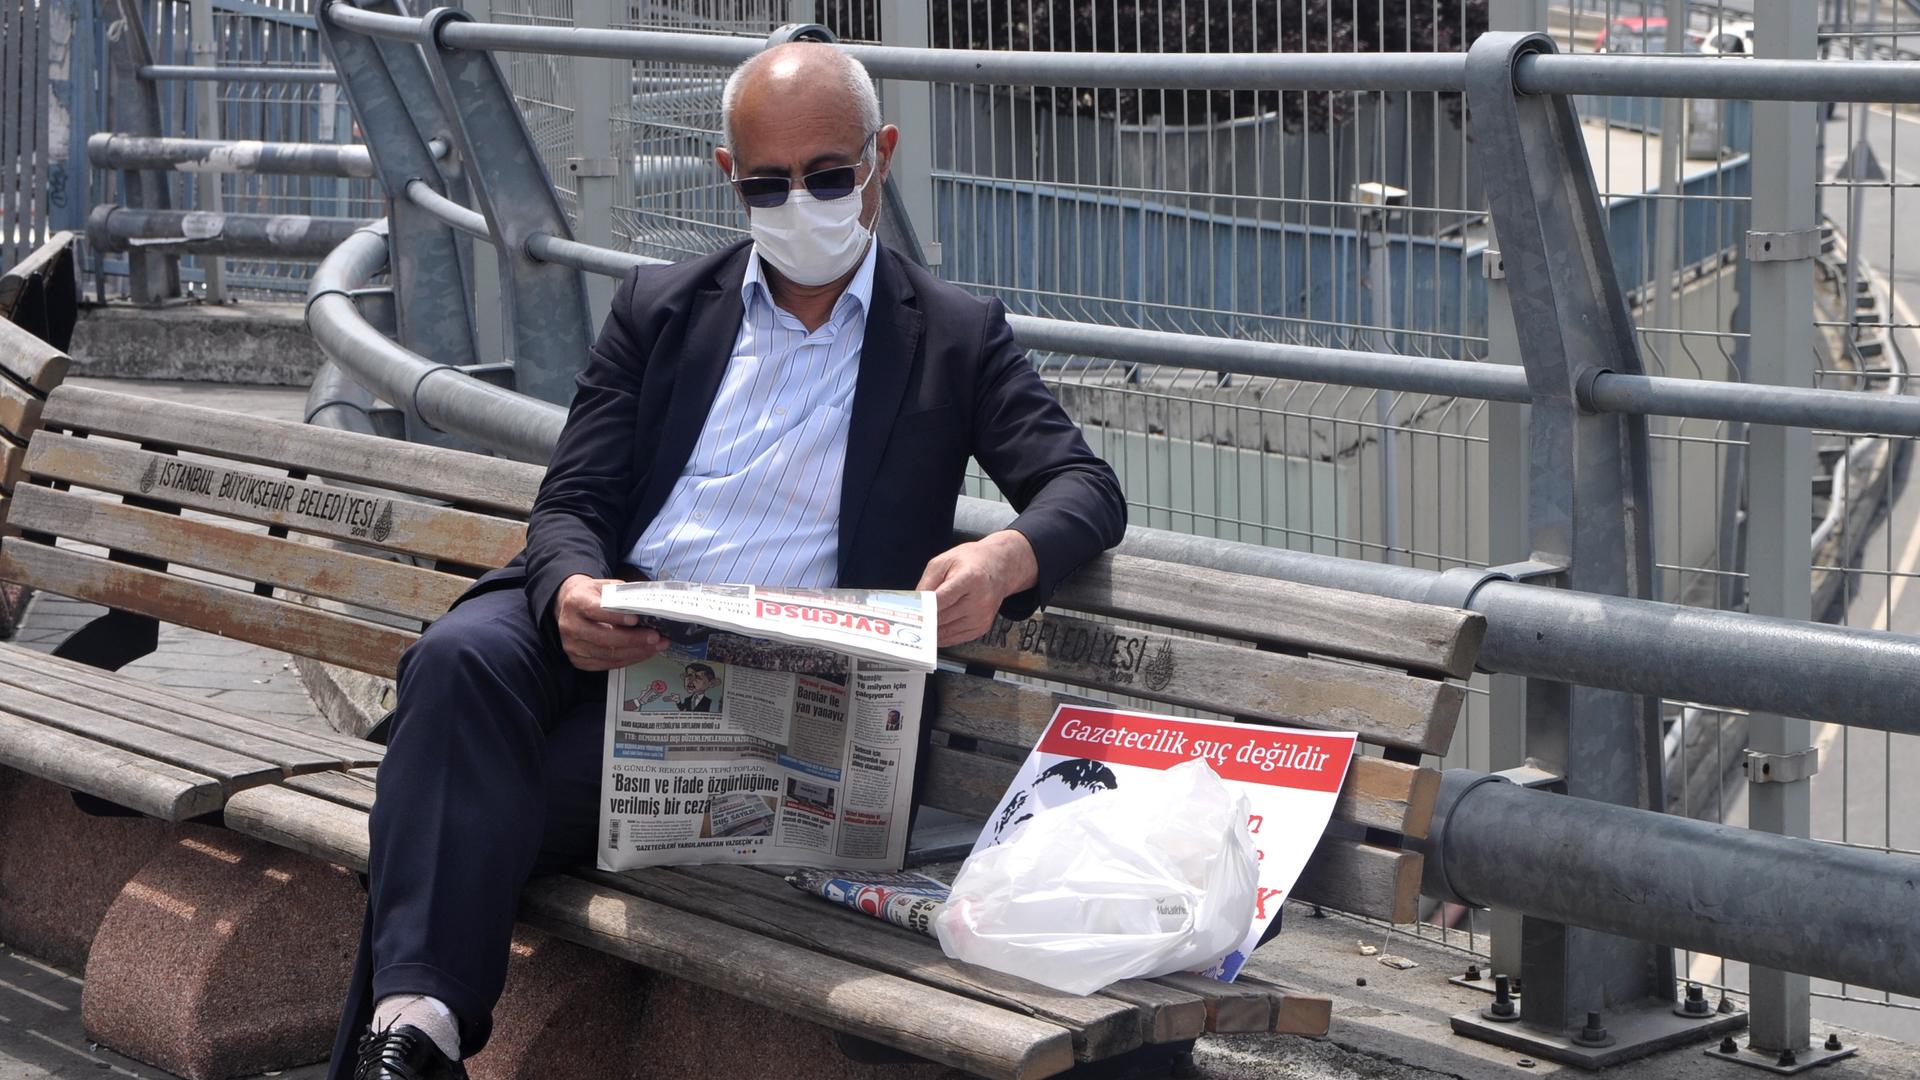 A man in a suit reads a newspaper on a bench outside 